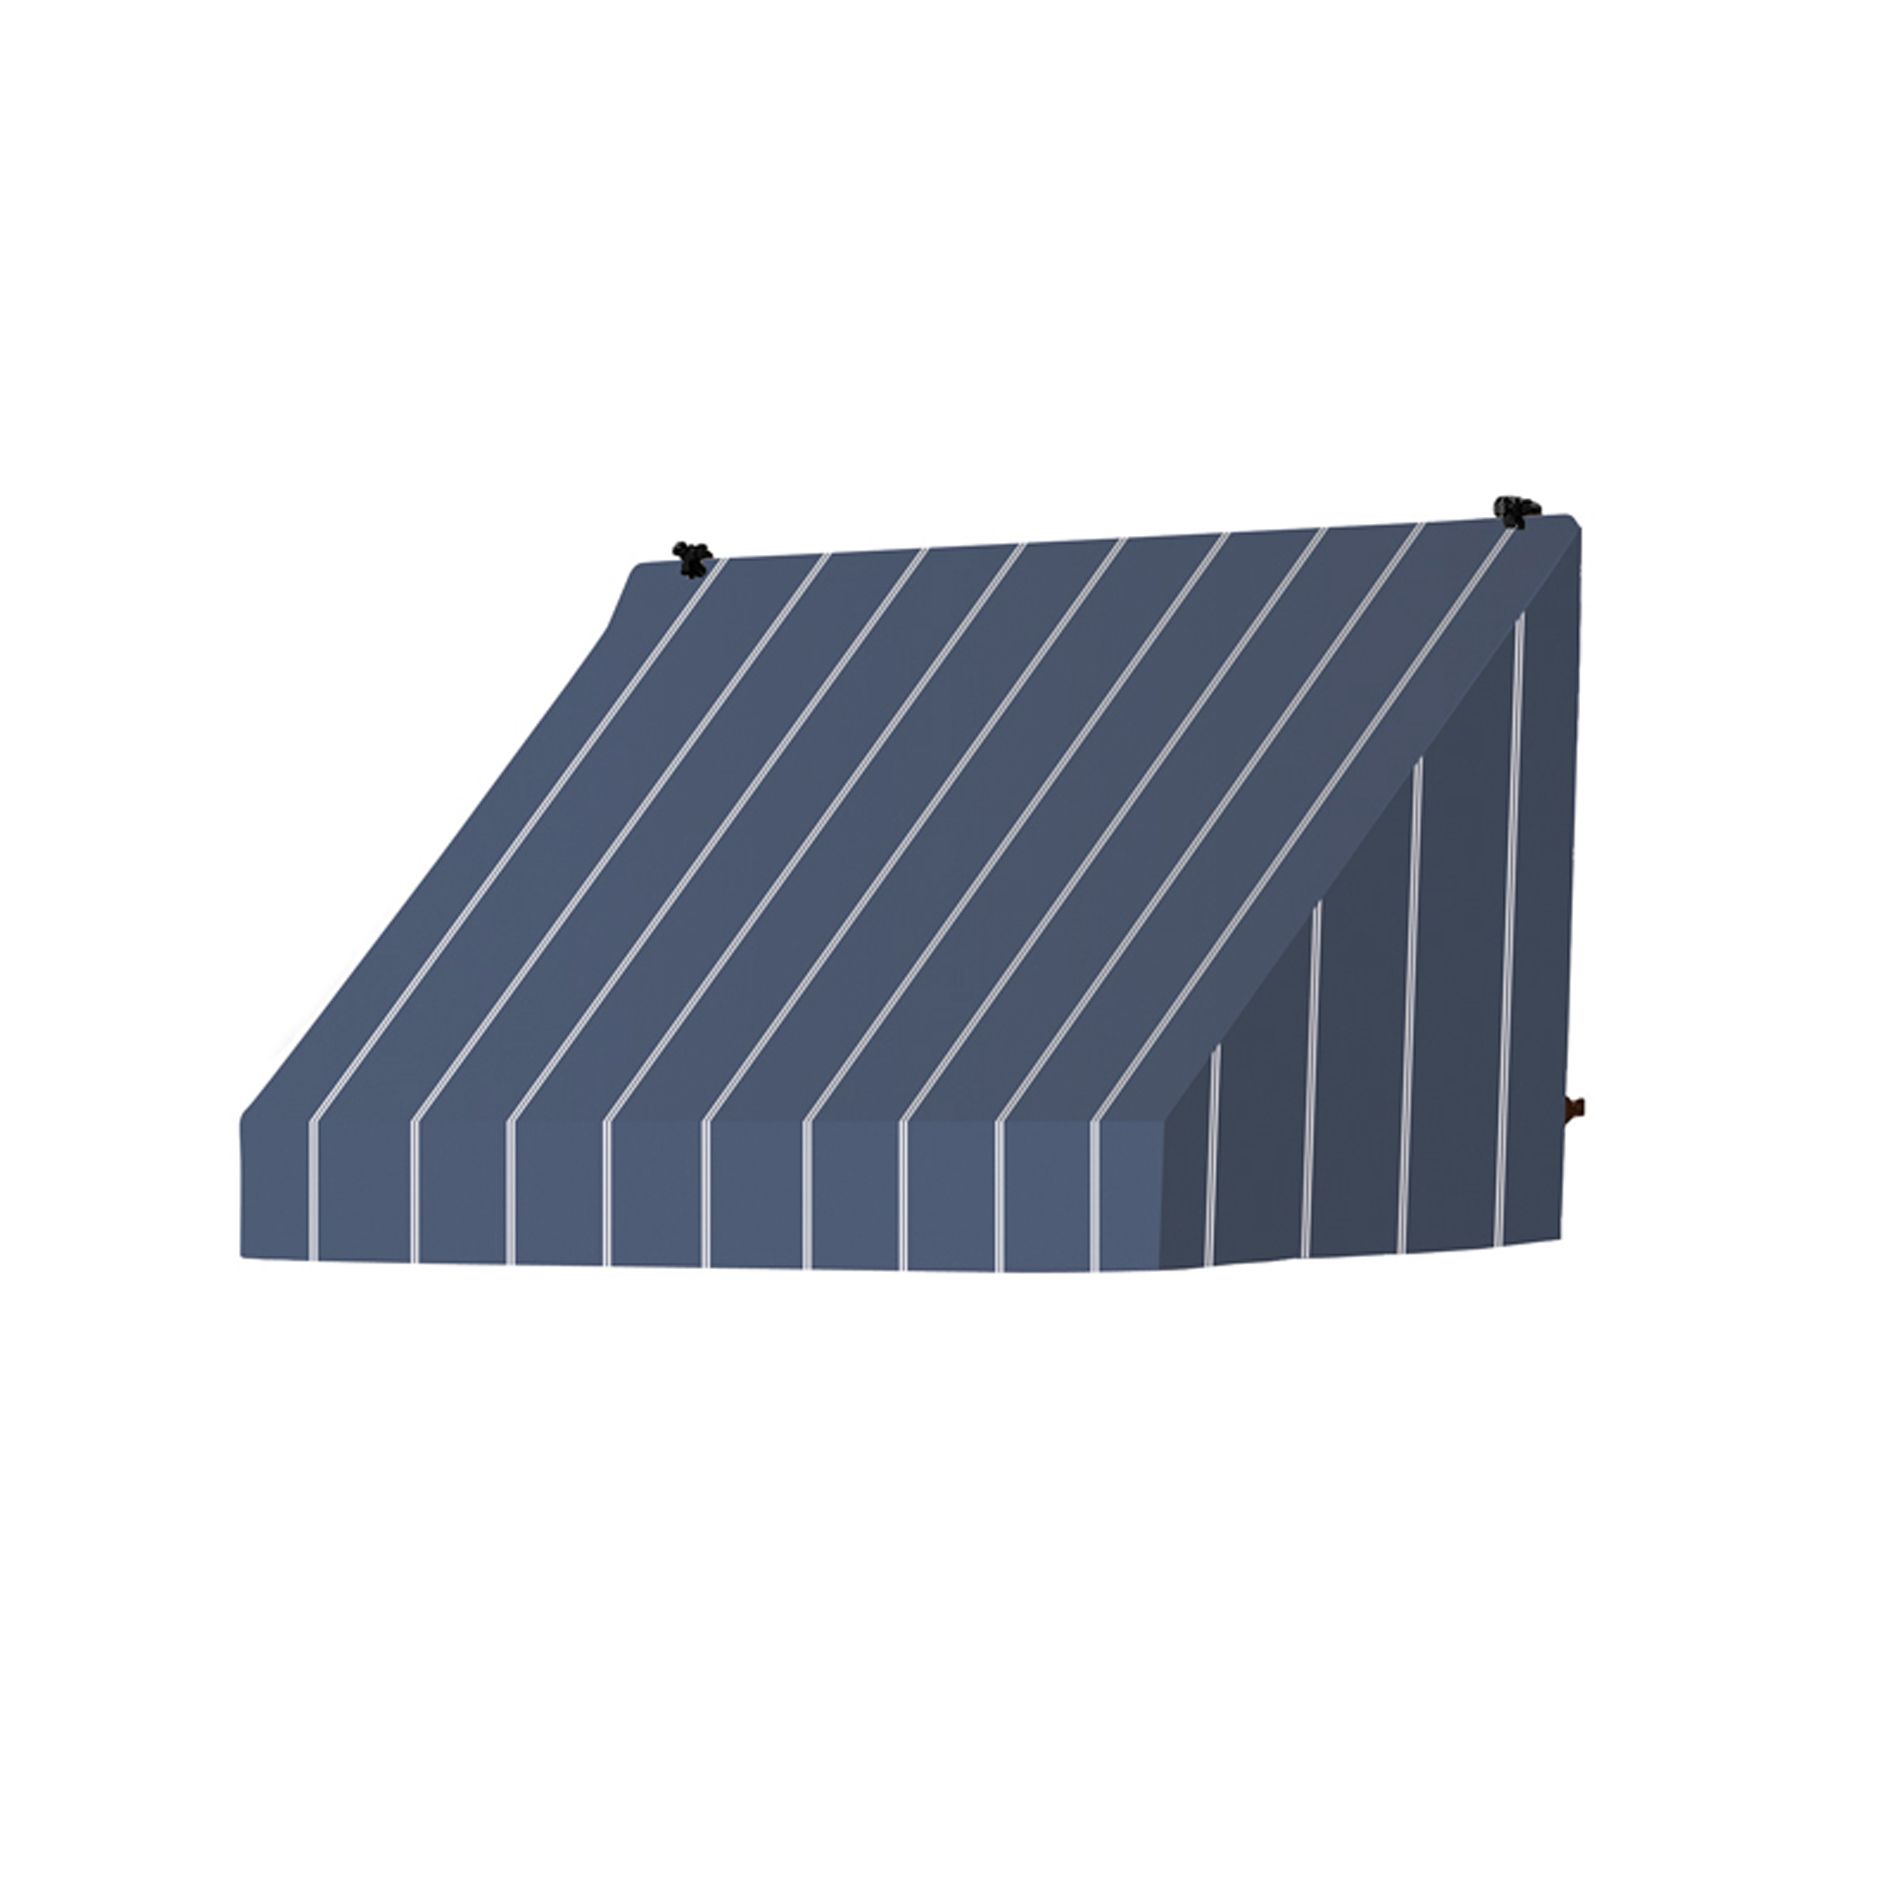 Awnings in a Box&reg; 4' Classic Awning